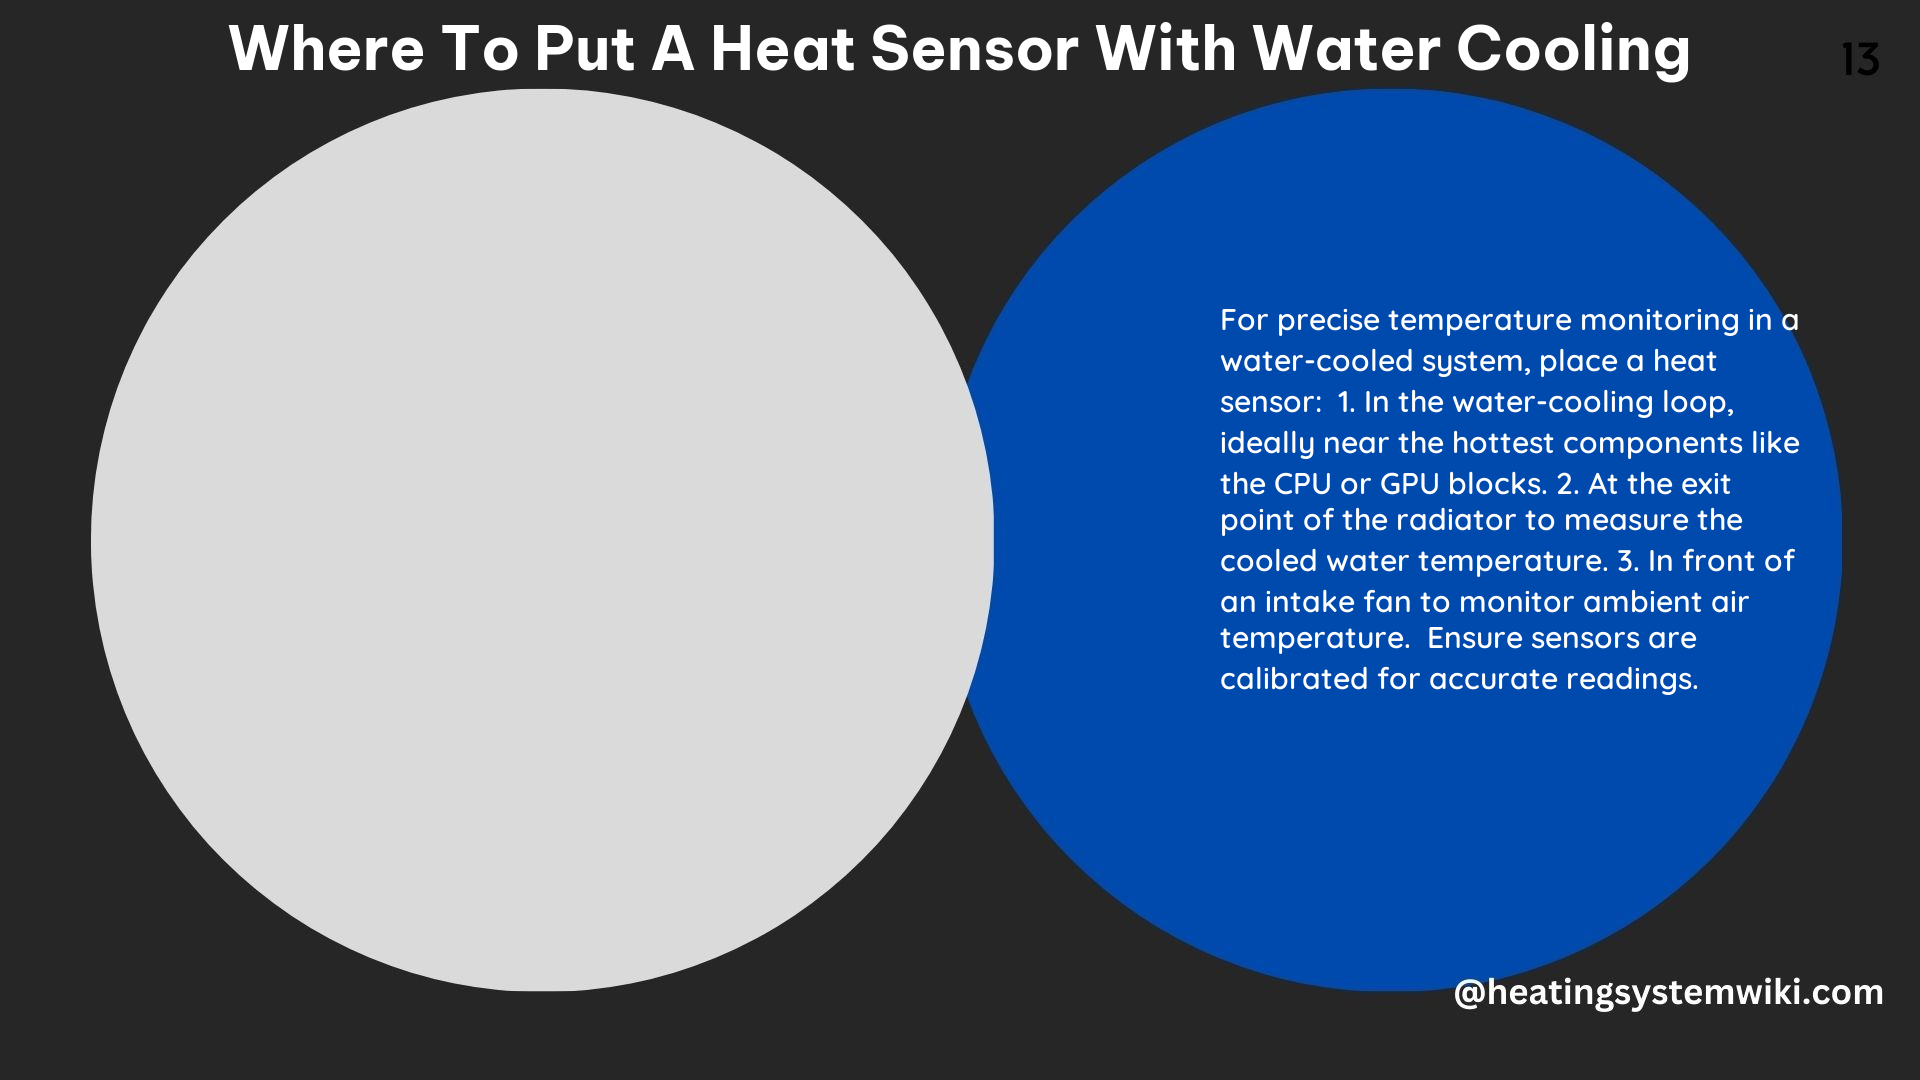 Where to Put a Heat Sensor With Water Cooling